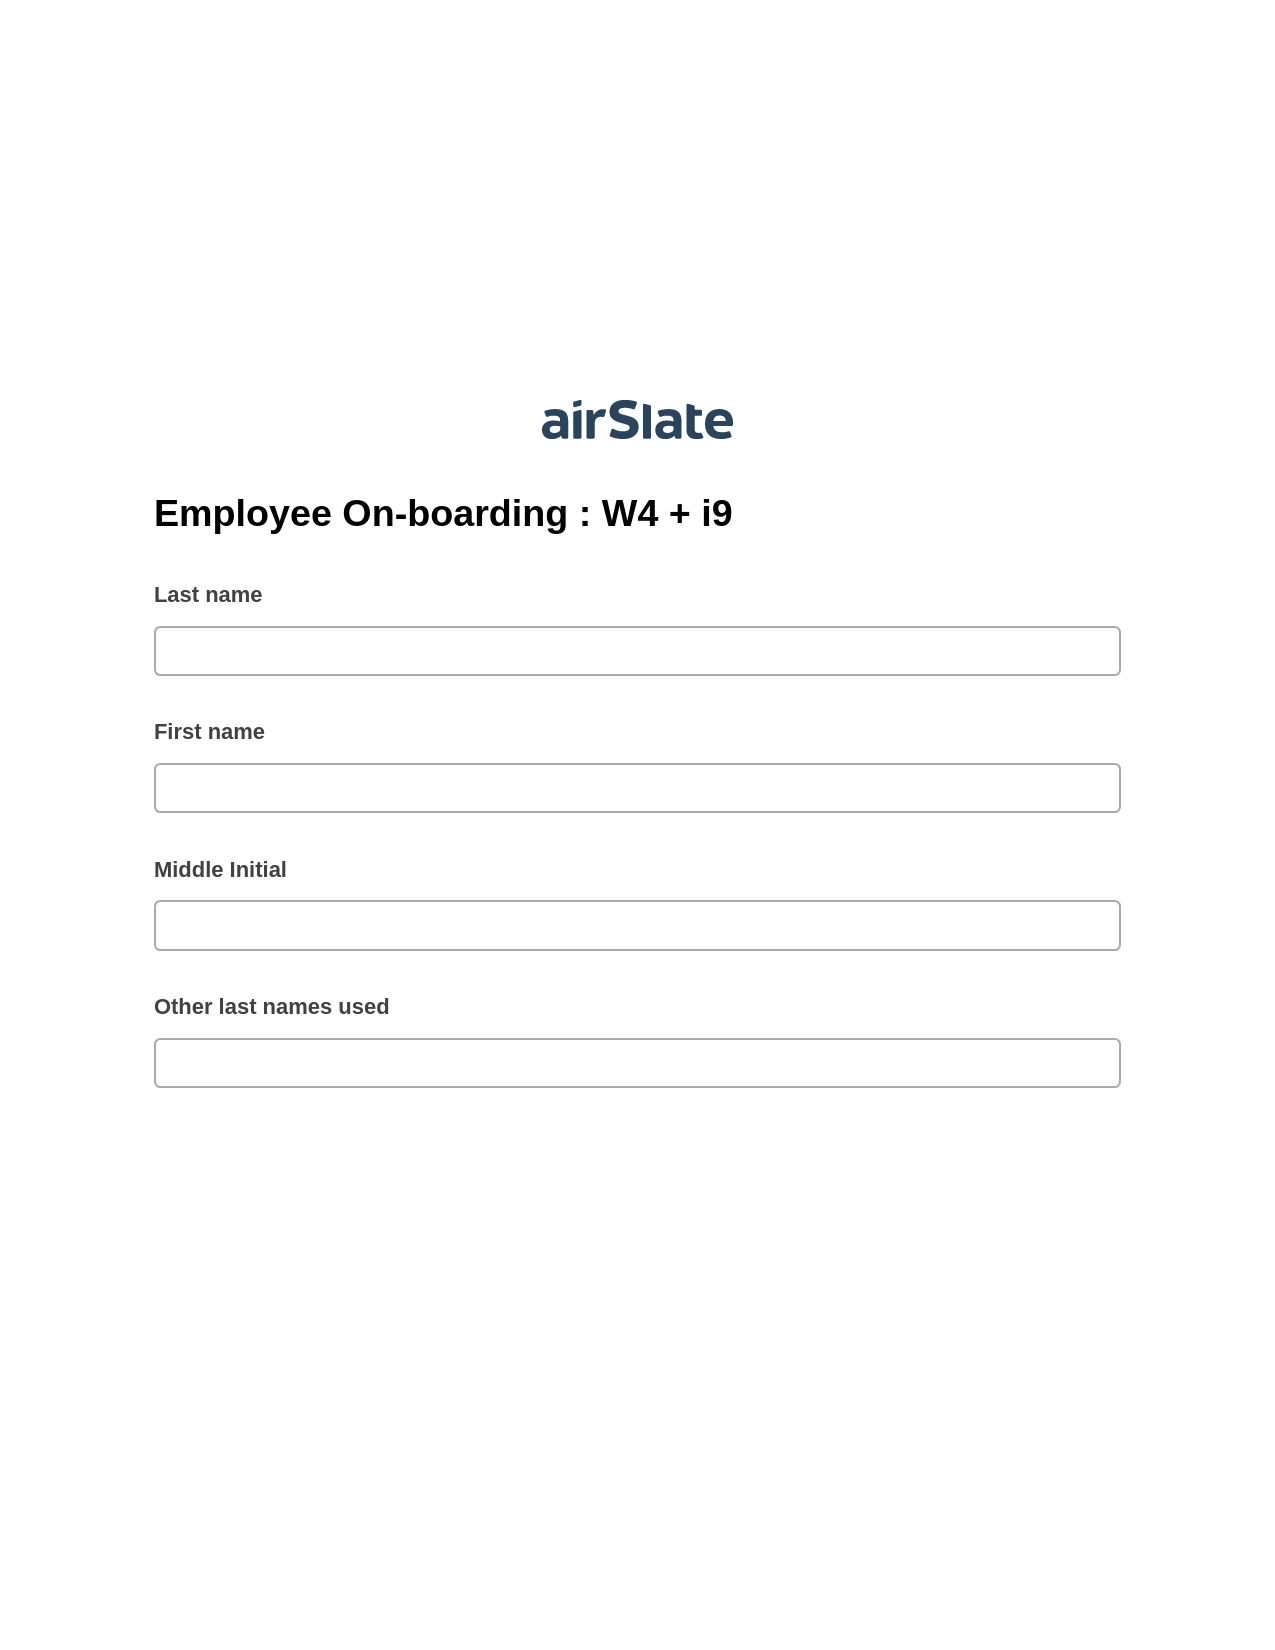 Employee On-boarding : W4 + i9 Pre-fill Slate from MS Dynamics 365 Records Bot, Mailchimp Add Recipient to Audience Bot, OneDrive Bot